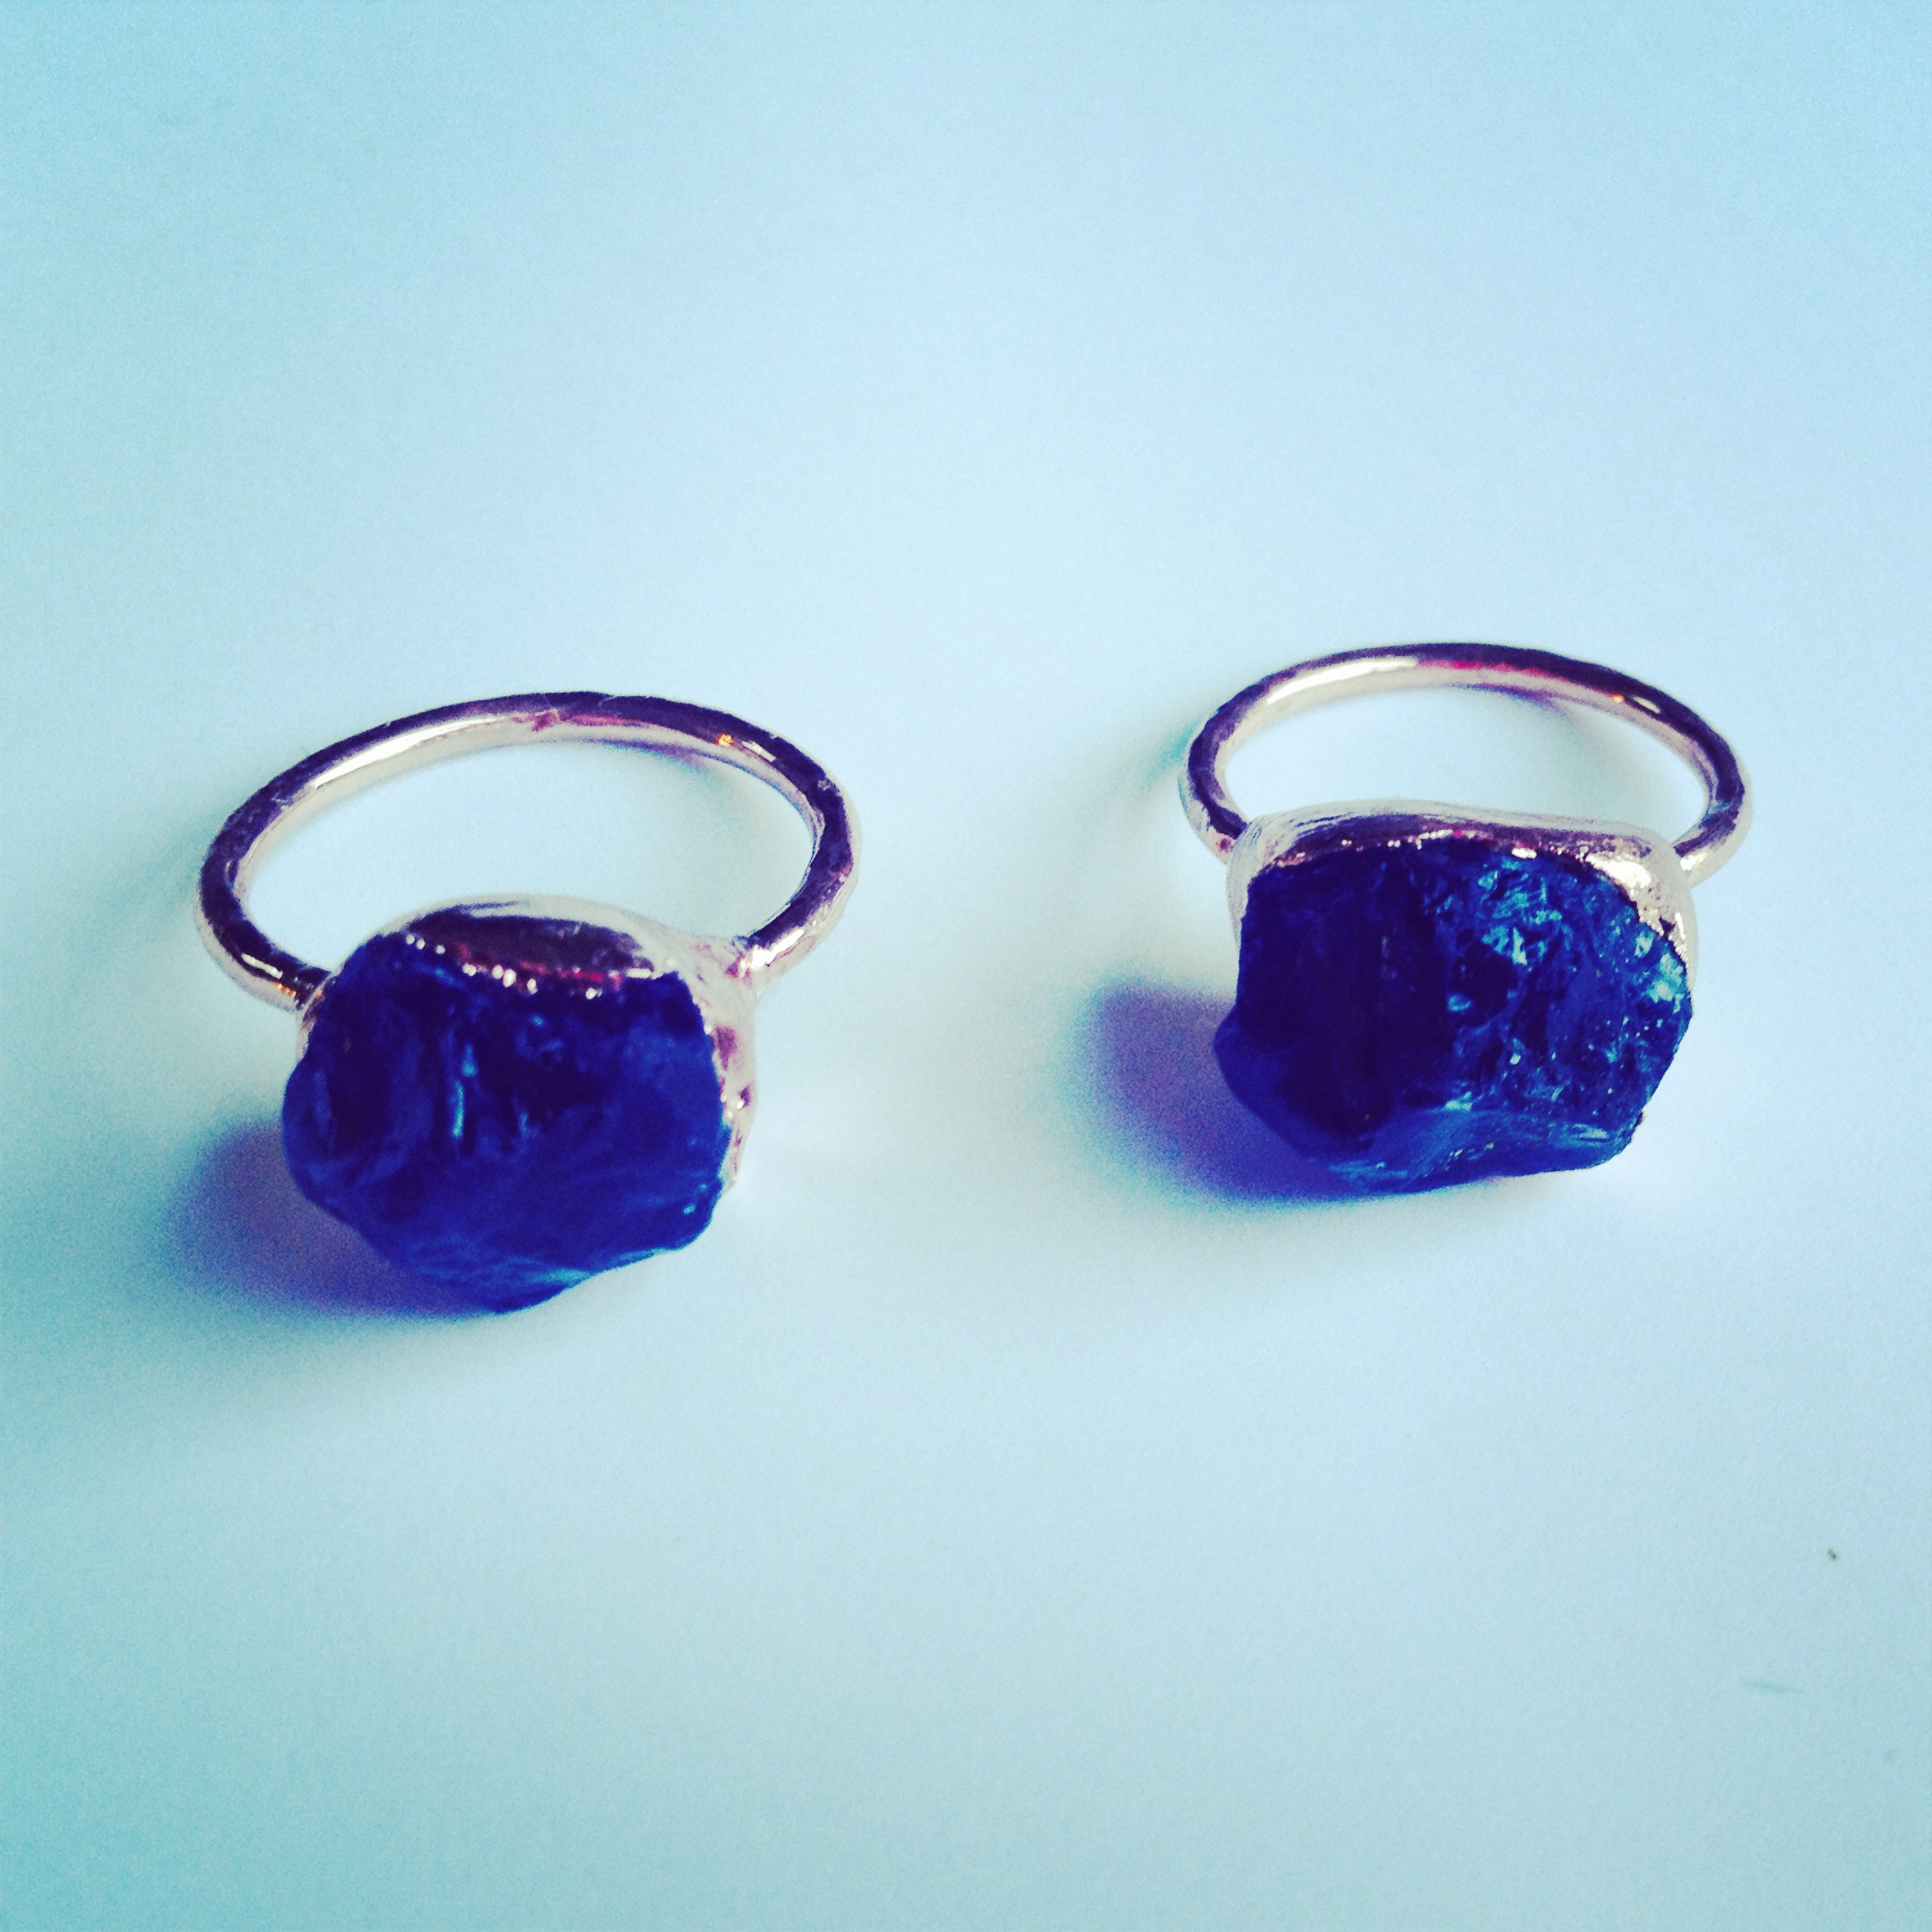 amethyst nugget rings electroformed in shiny copper (sizes 8-1/2 & 6-1/2)